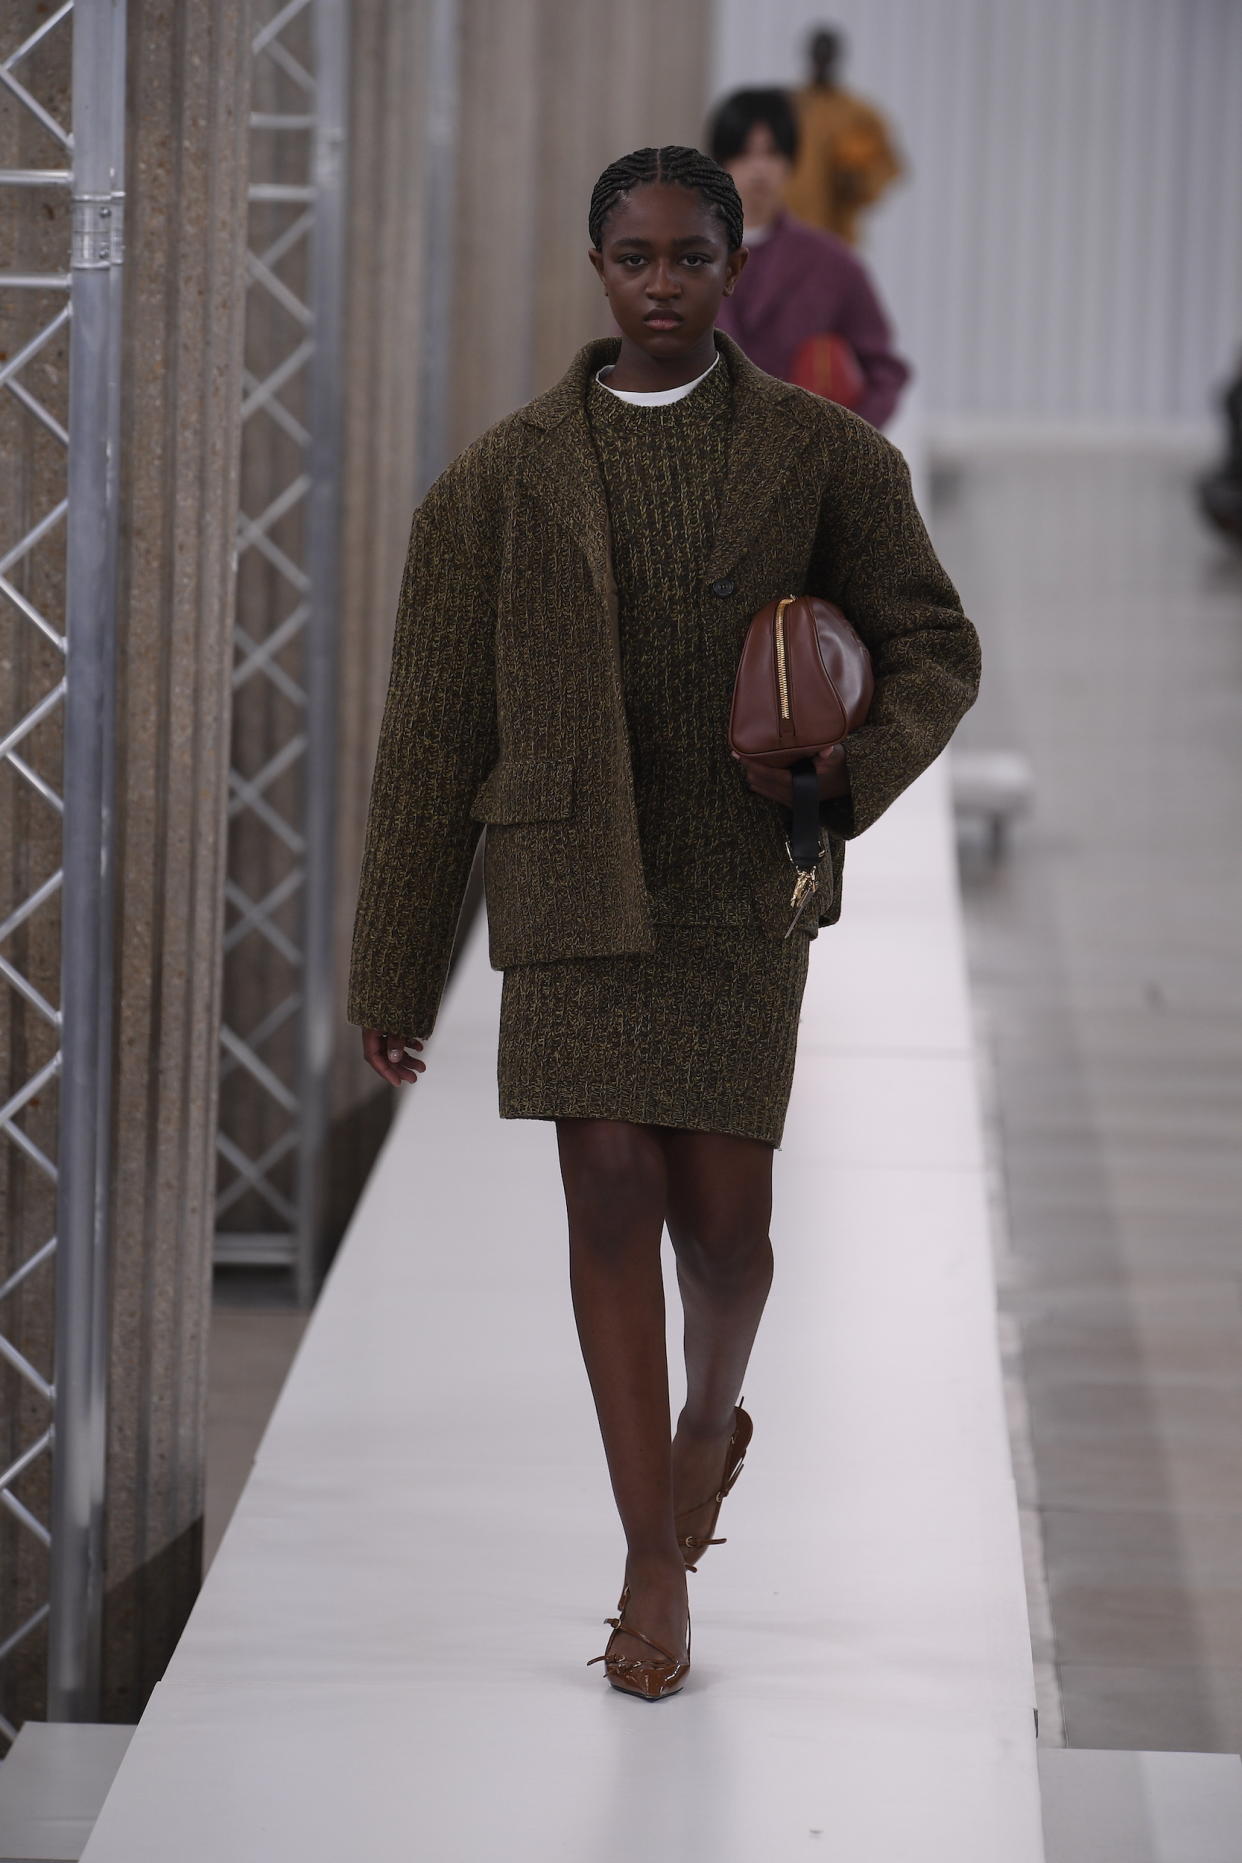 Zaya Wade was part of the Miu Miu Fall 2023 Ready to Wear fashion show on March 7, 2023 at the French Economic, Social and Environmental Council in Paris, France. (Giovanni Giannoni / WWD via Getty Images)